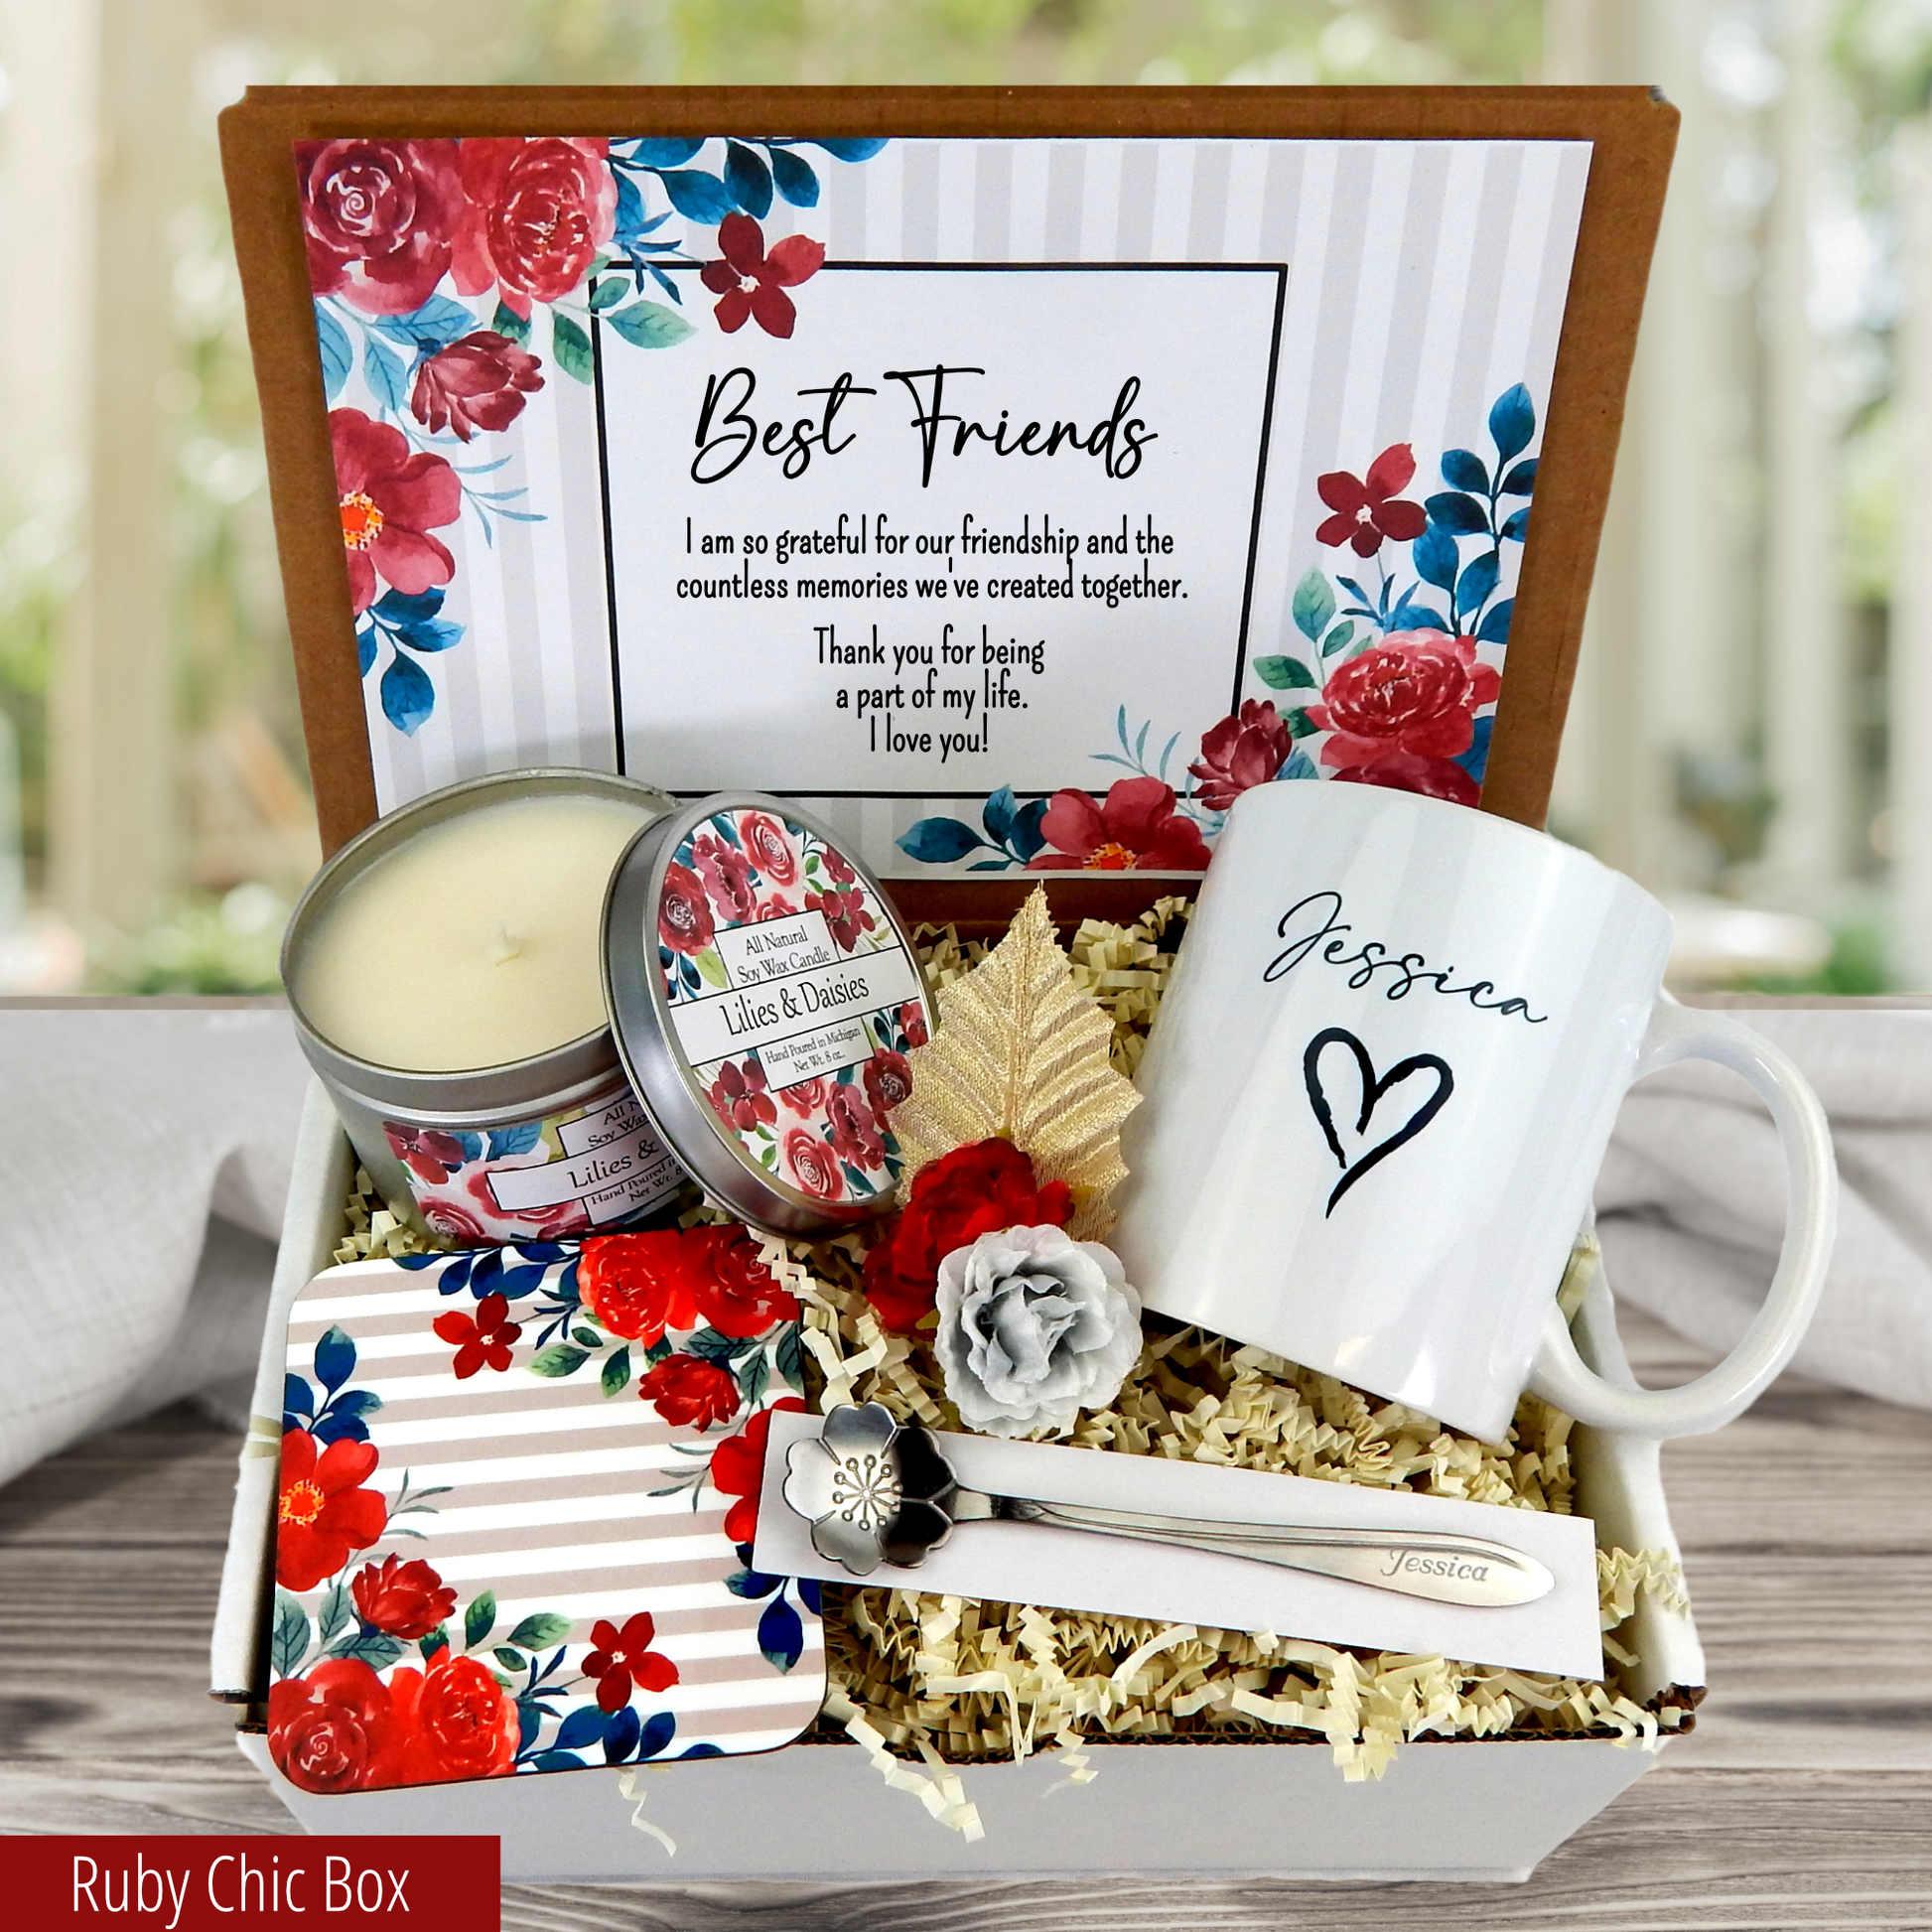 Gift for Best Friend - Friendship Gift - Care Package for Friend – Blue  Stone River